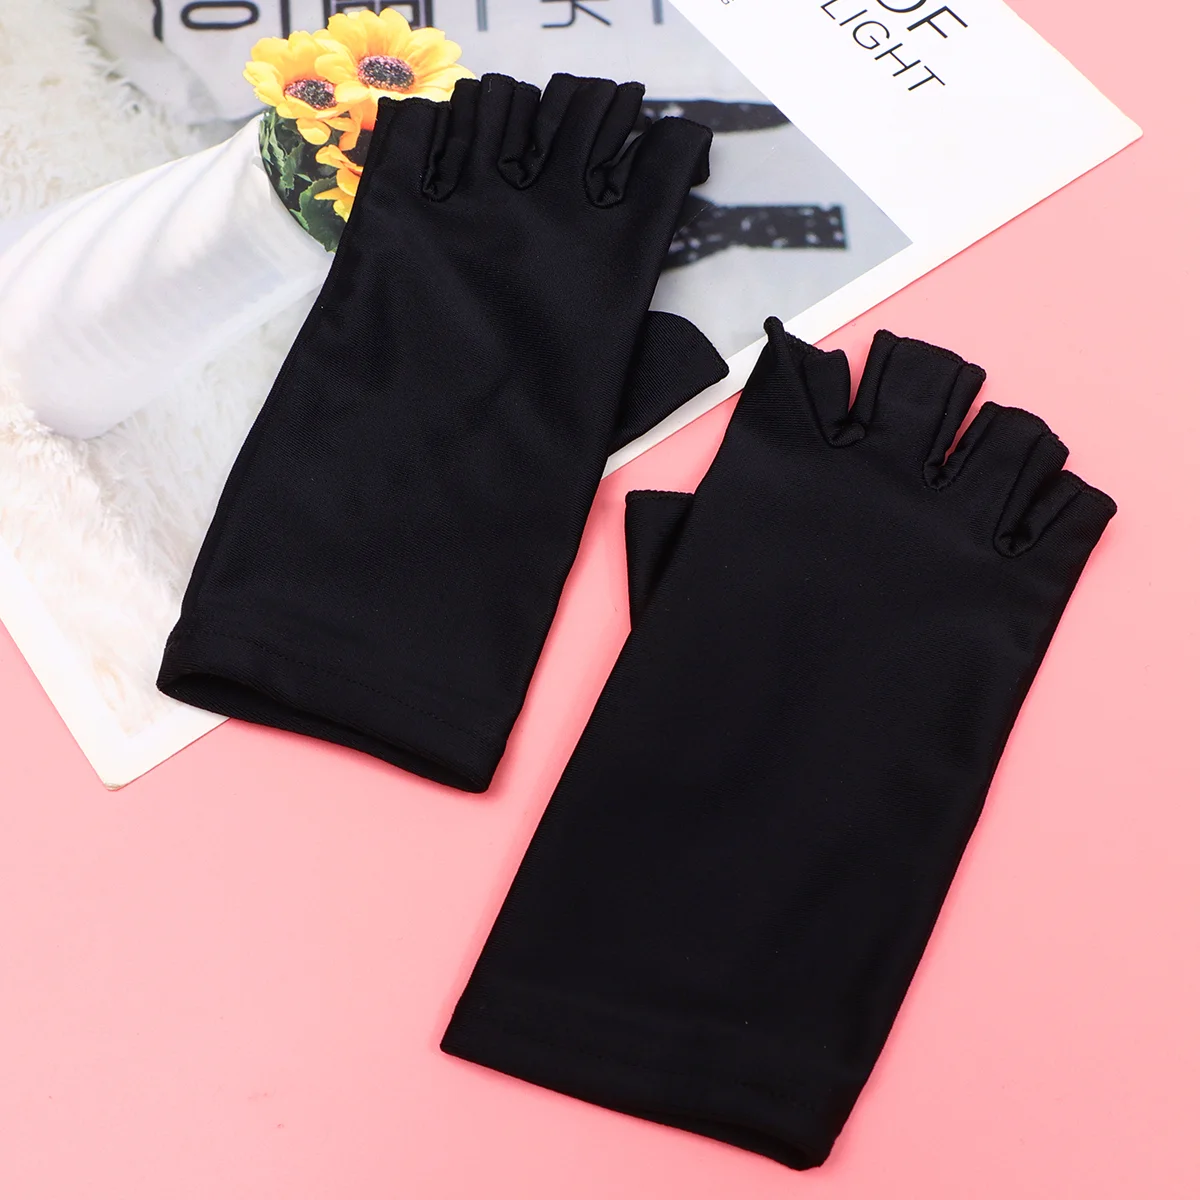 

2 Pairs UV Shield Glove Manicures Glove Anti UV Fingerless Hands for Lamp Manicure Dryer Tools